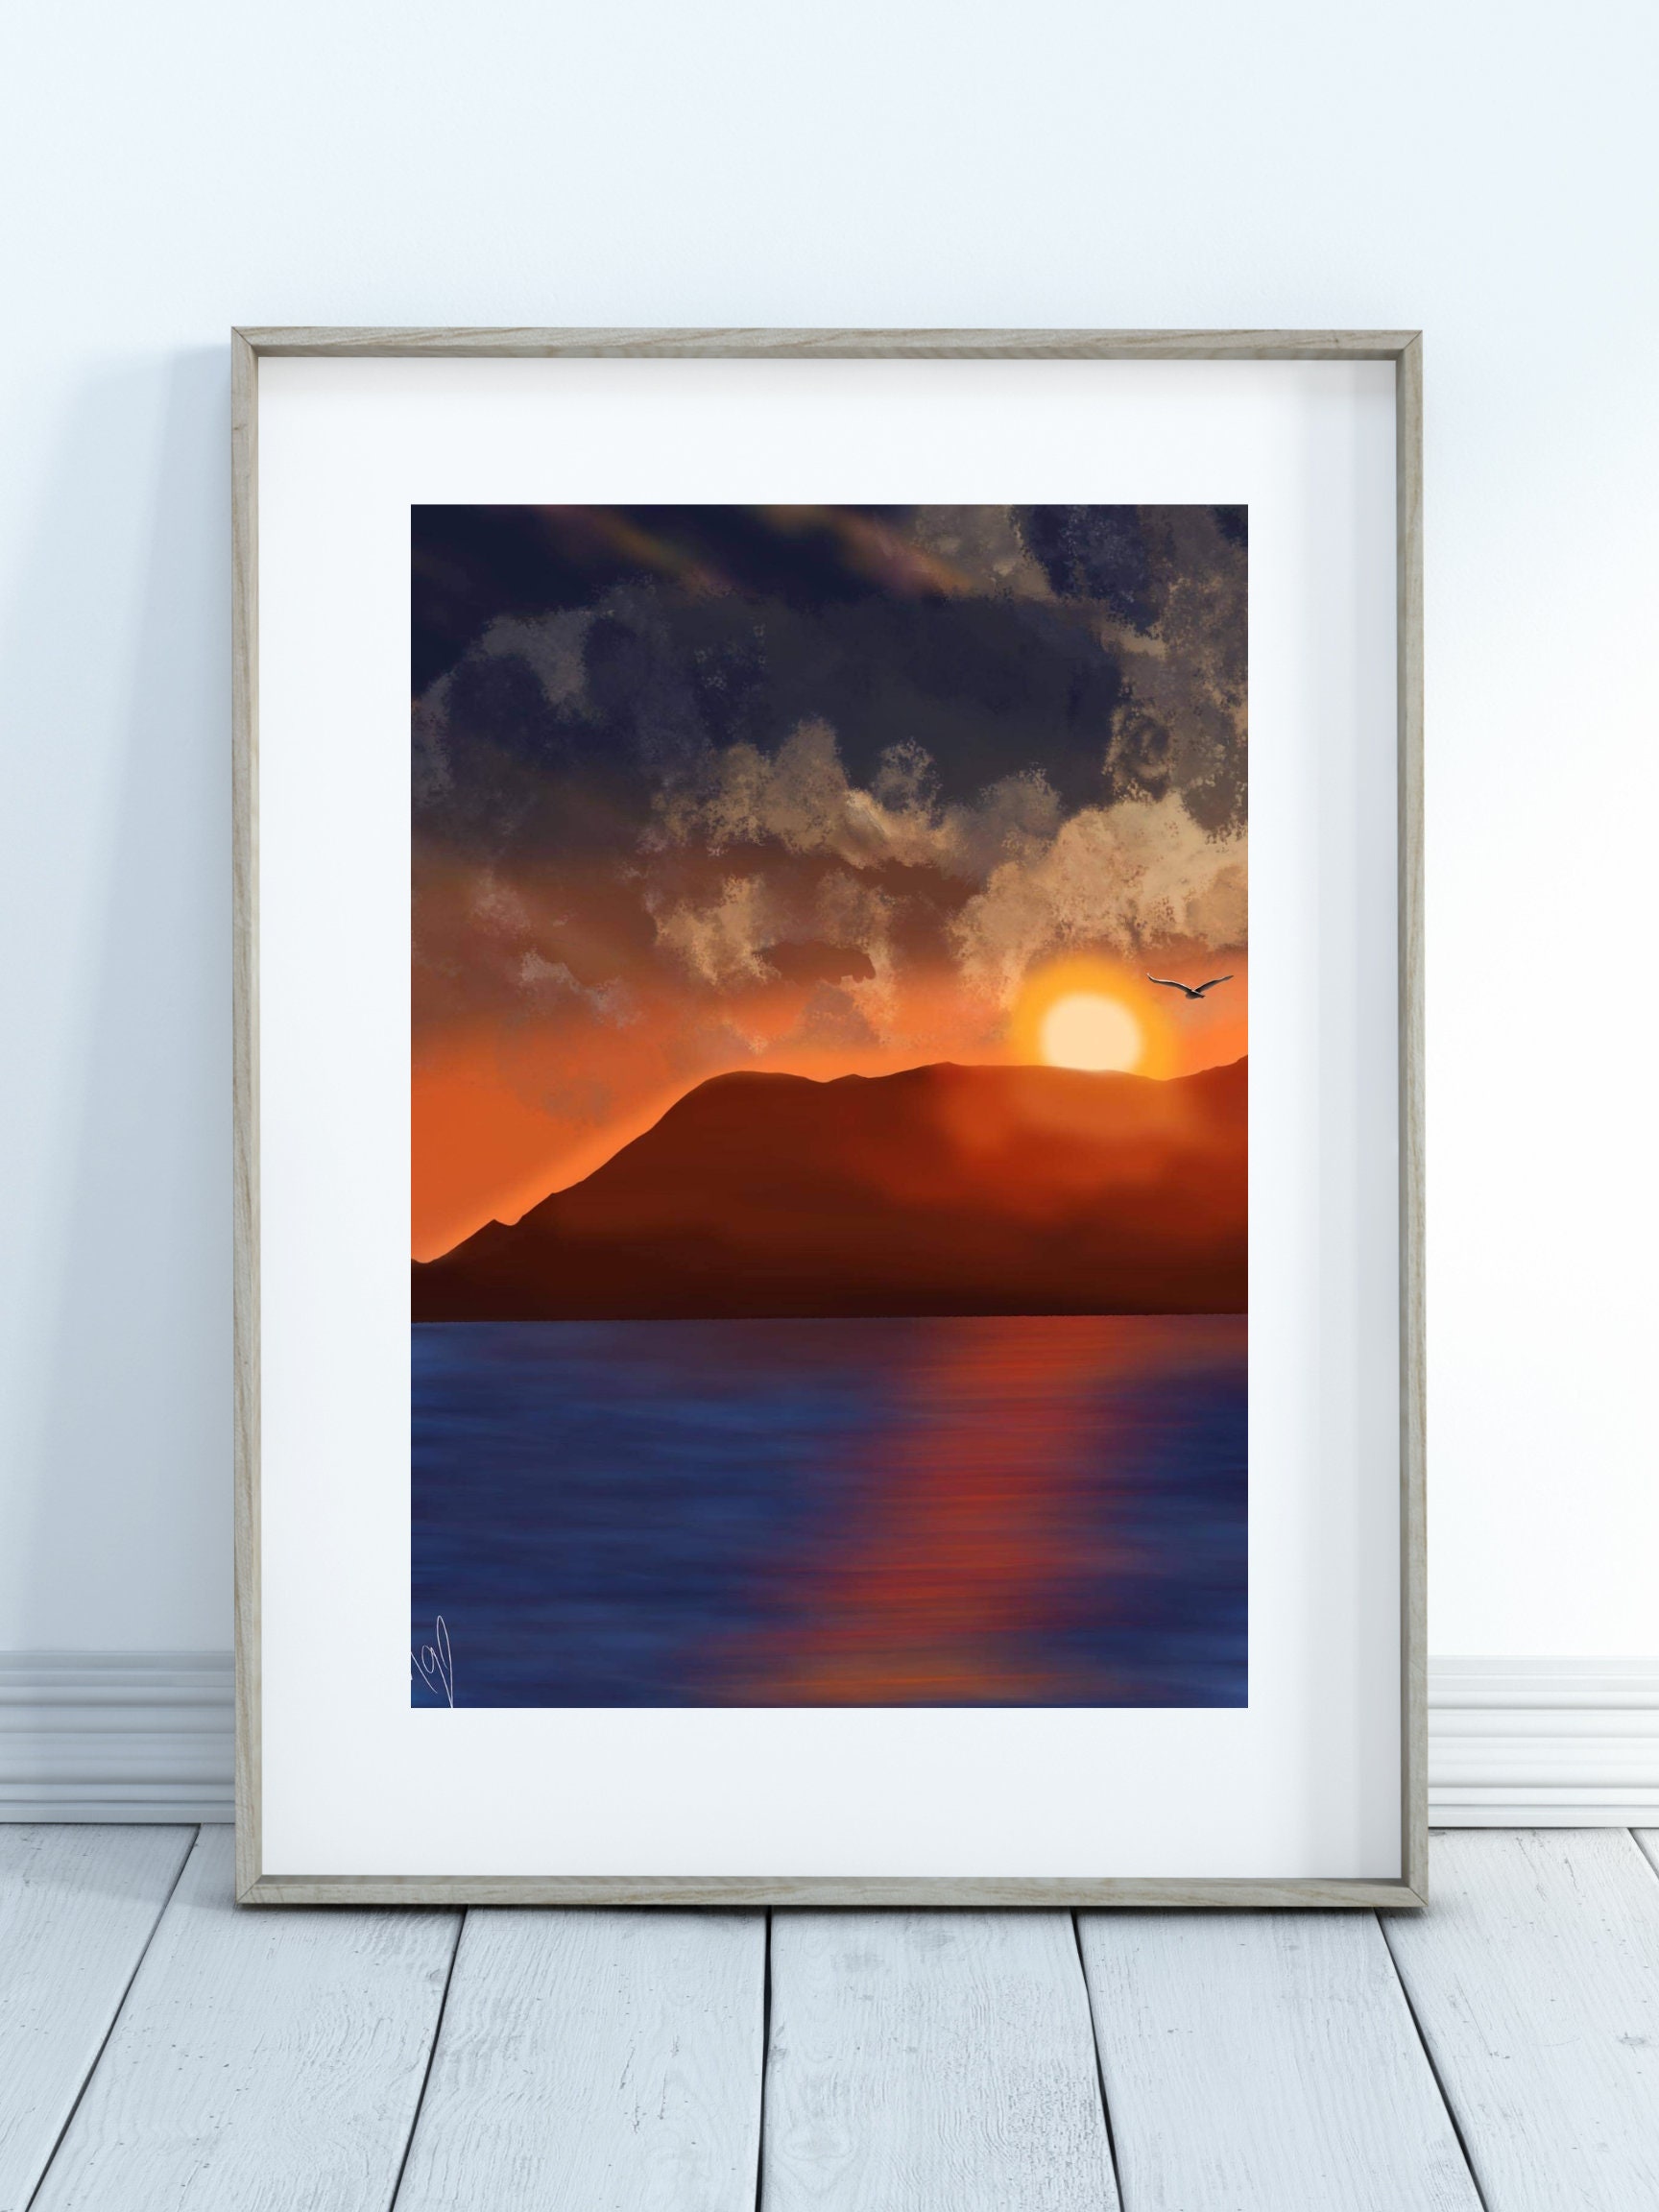 Watercolour landscape painting - SUNSET over Lake Malawi - Sun reflecting  on water - warm colours Art Board Print for Sale by Ibolya Taligas